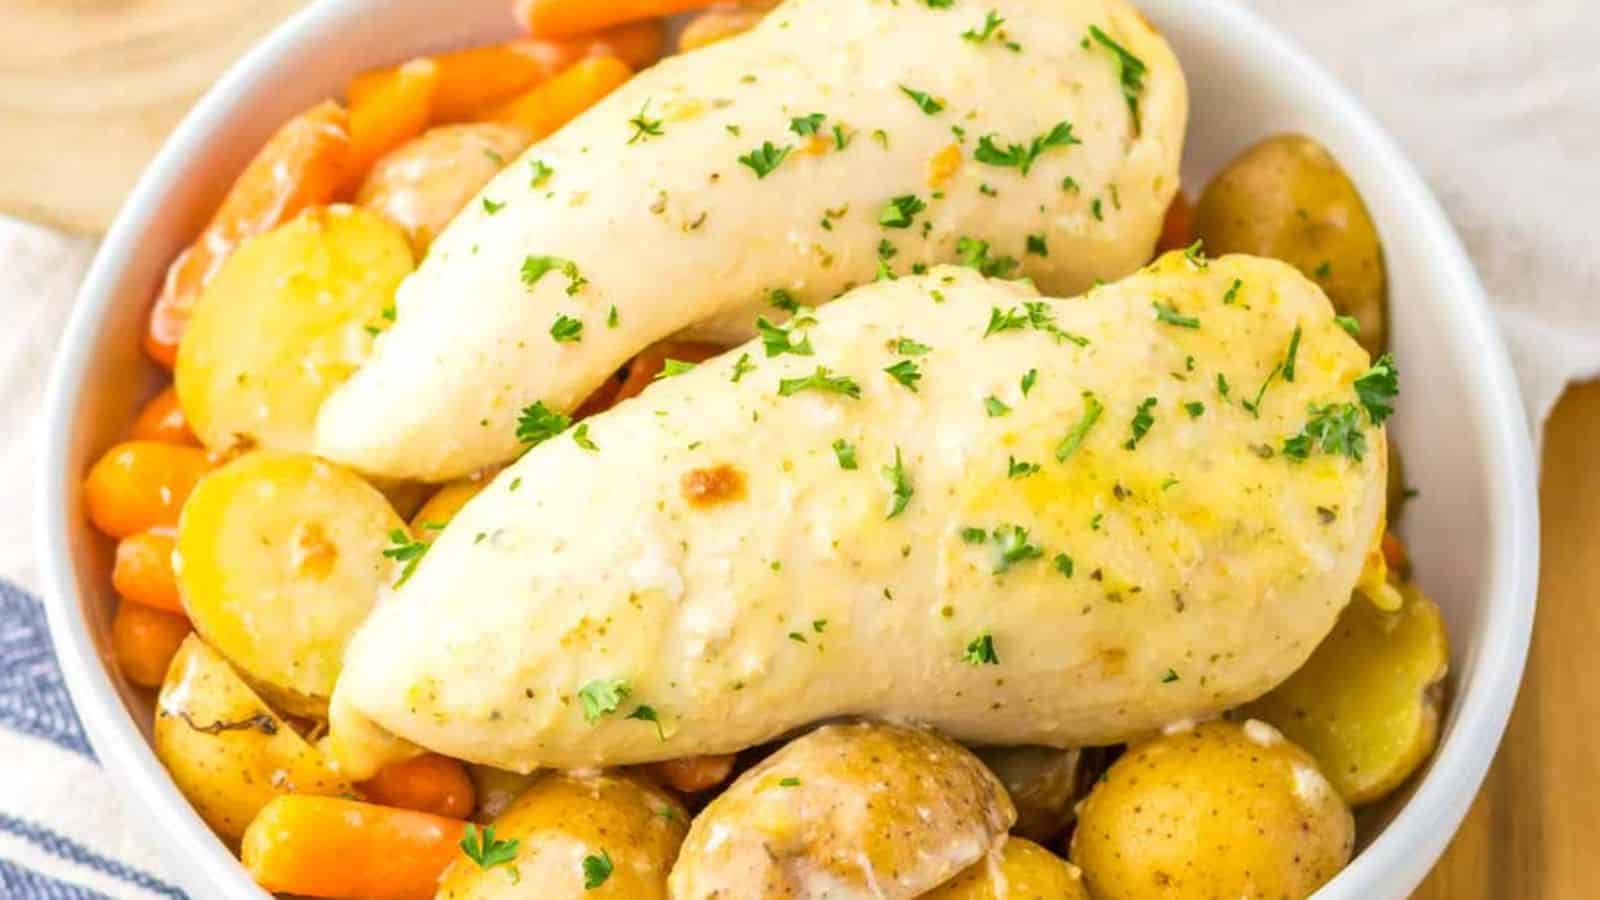 <p>For a set-it-and-forget-it type of meal, our Slow Cooker Ranch Chicken is the answer! The chicken comes out flavored with ranch, moist and tender. It's the hands-off hero for a busy day. A dish this easy and delicious will become a new household staple.<br><strong>Get the Recipe: </strong><a href="https://www.pocketfriendlyrecipes.com/slow-cooker-ranch-chicken/?utm_source=msn&utm_medium=page&utm_campaign=msn">Slow Cooker Ranch Chicken</a></p> <p>The post <a href="https://easyindiancookbook.com/chicken-dishes-family-begging-for-more/">17 Chicken Dishes That'll Have Your Family Begging For More</a> appeared first on <a href="https://easyindiancookbook.com">Easy Indian Cookbook</a>.</p>